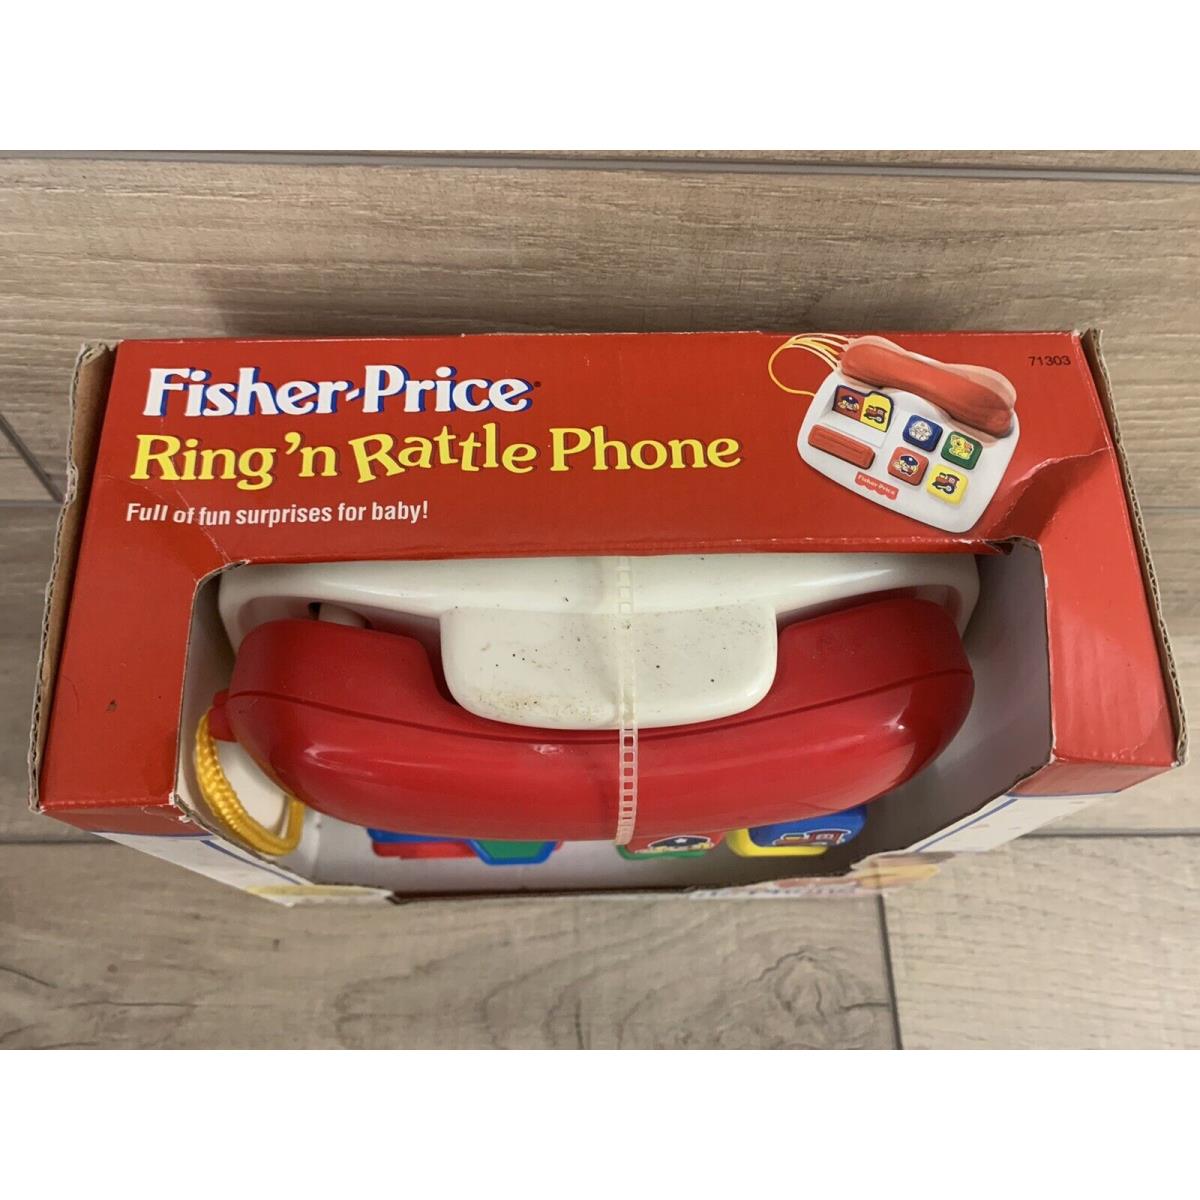 Vintage Fisher Price Ring n Rattle Phone Toy 1998 - See Details